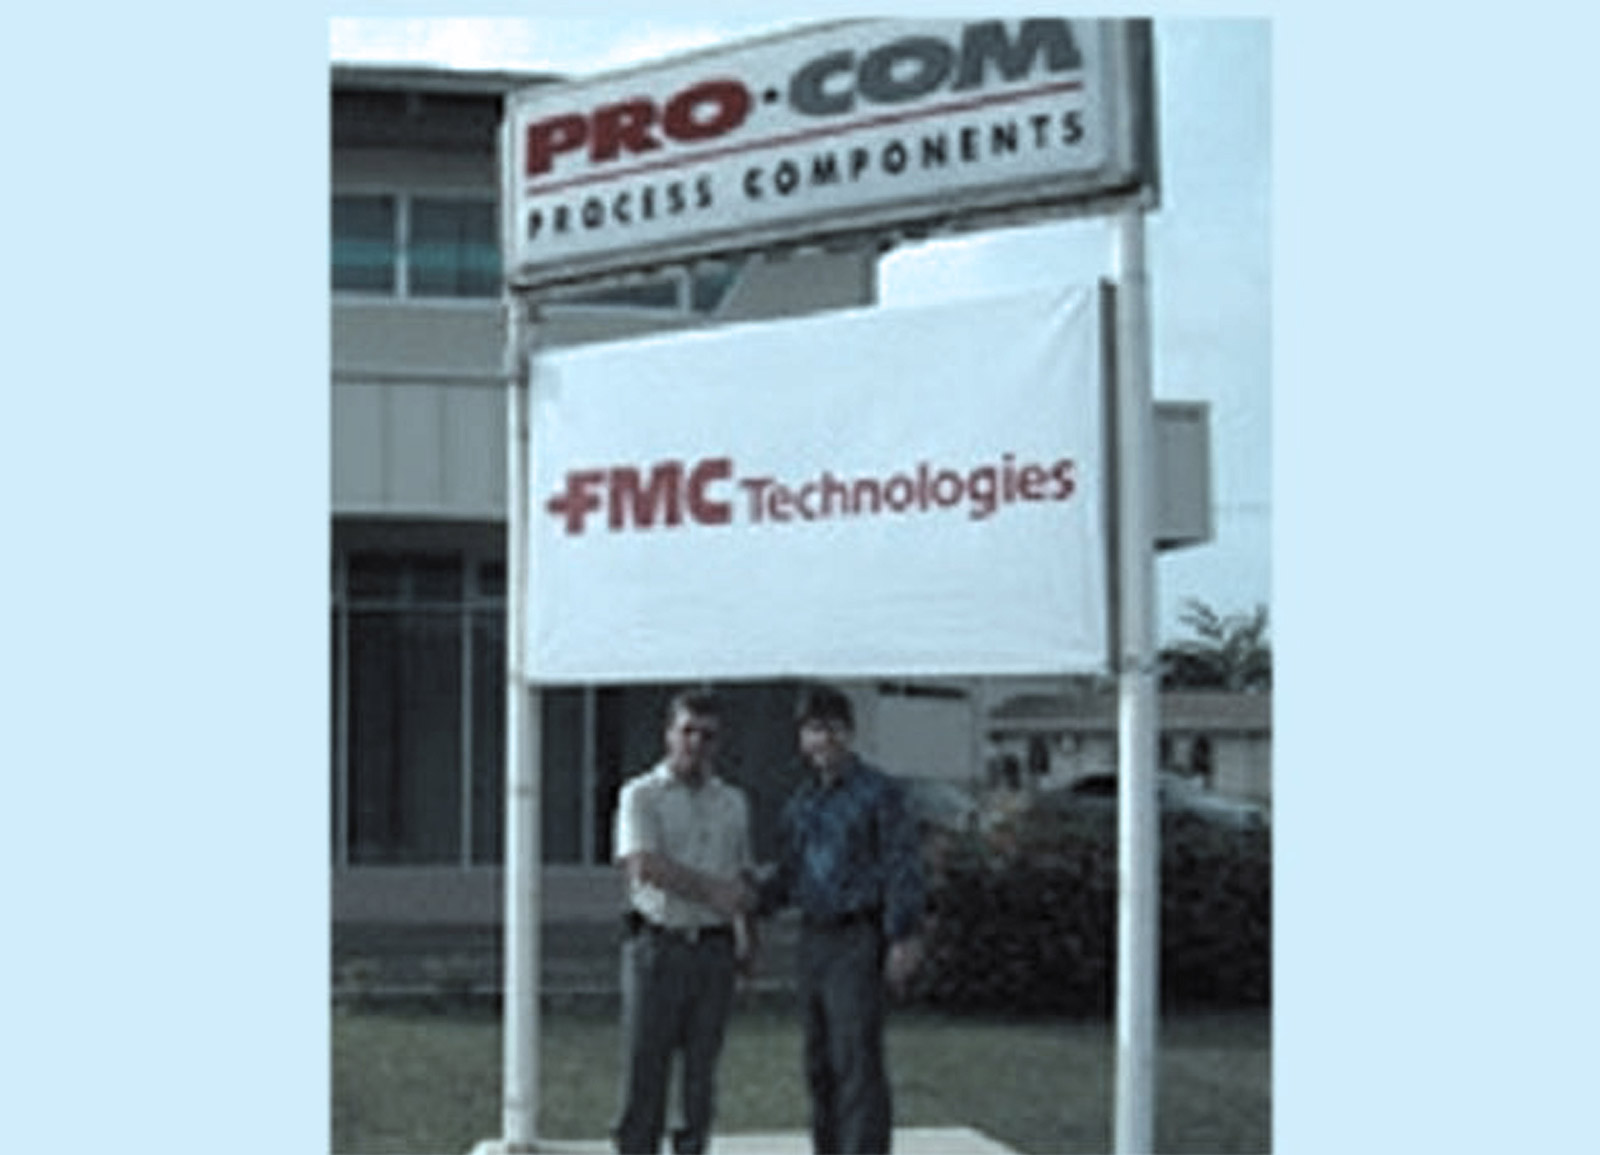 ProCom is the local agent for FMC Technologies